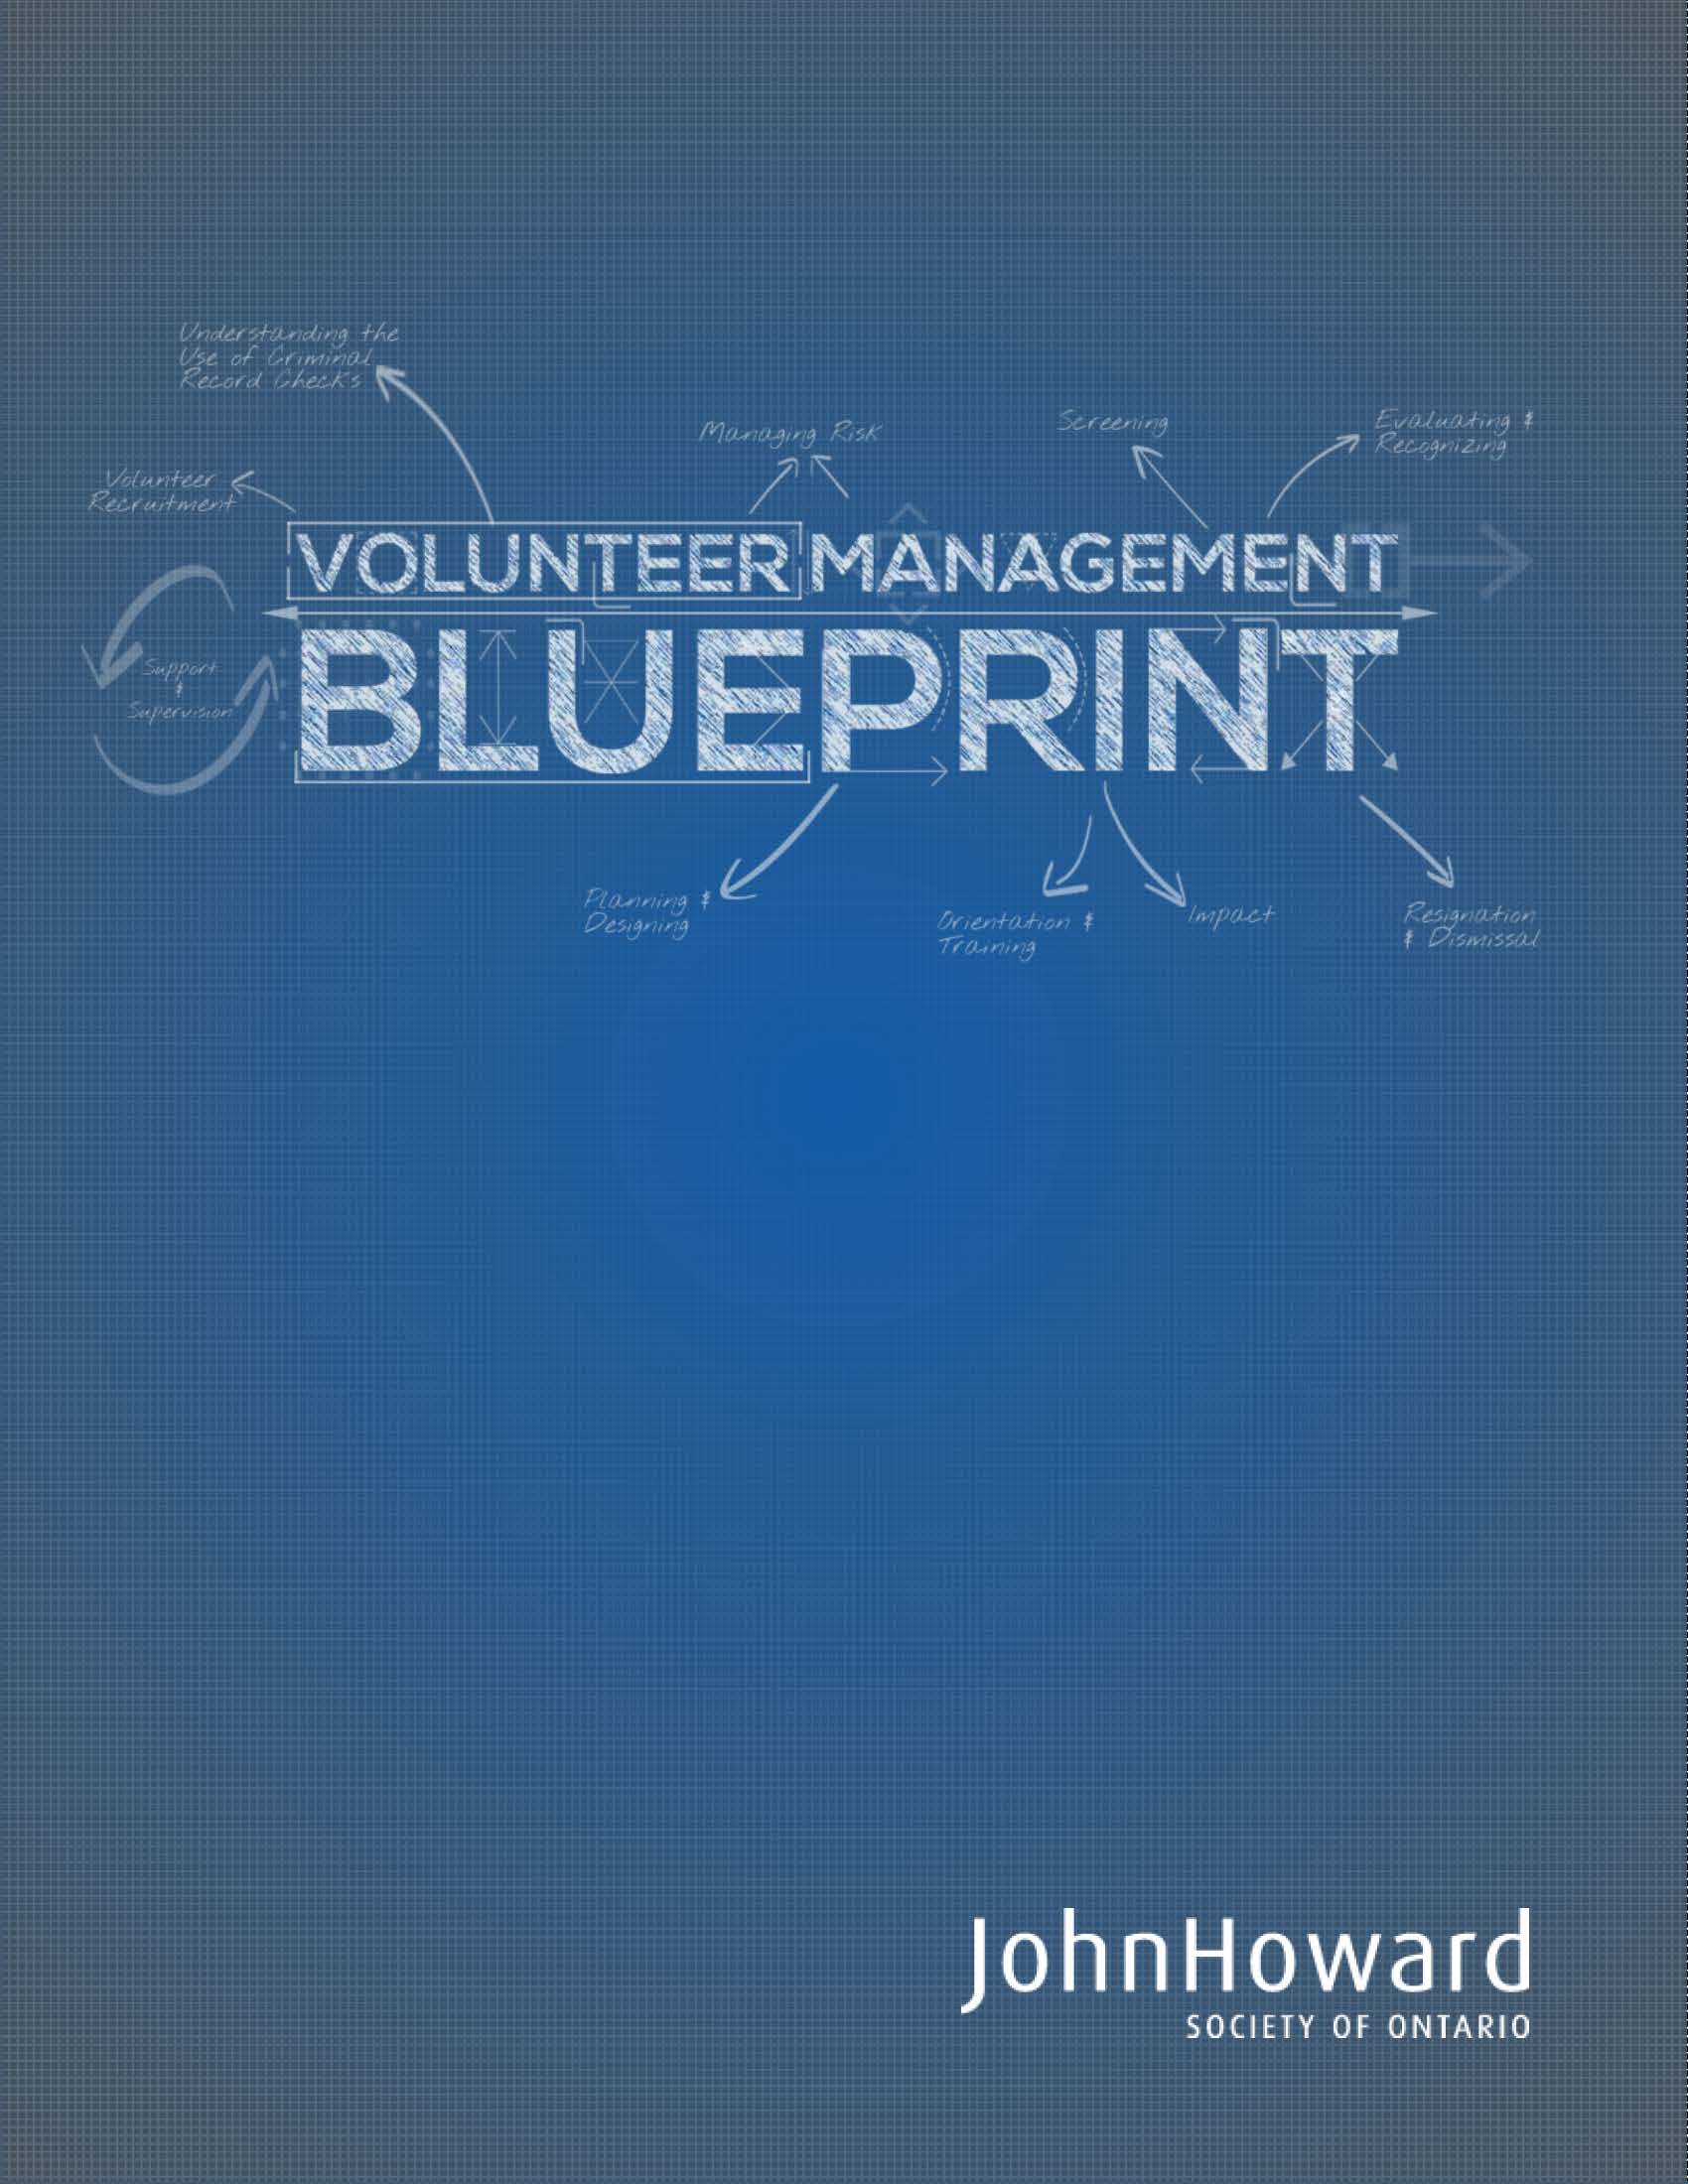 Cover of volunteer management blueprint report with faint white arrows coming from the title